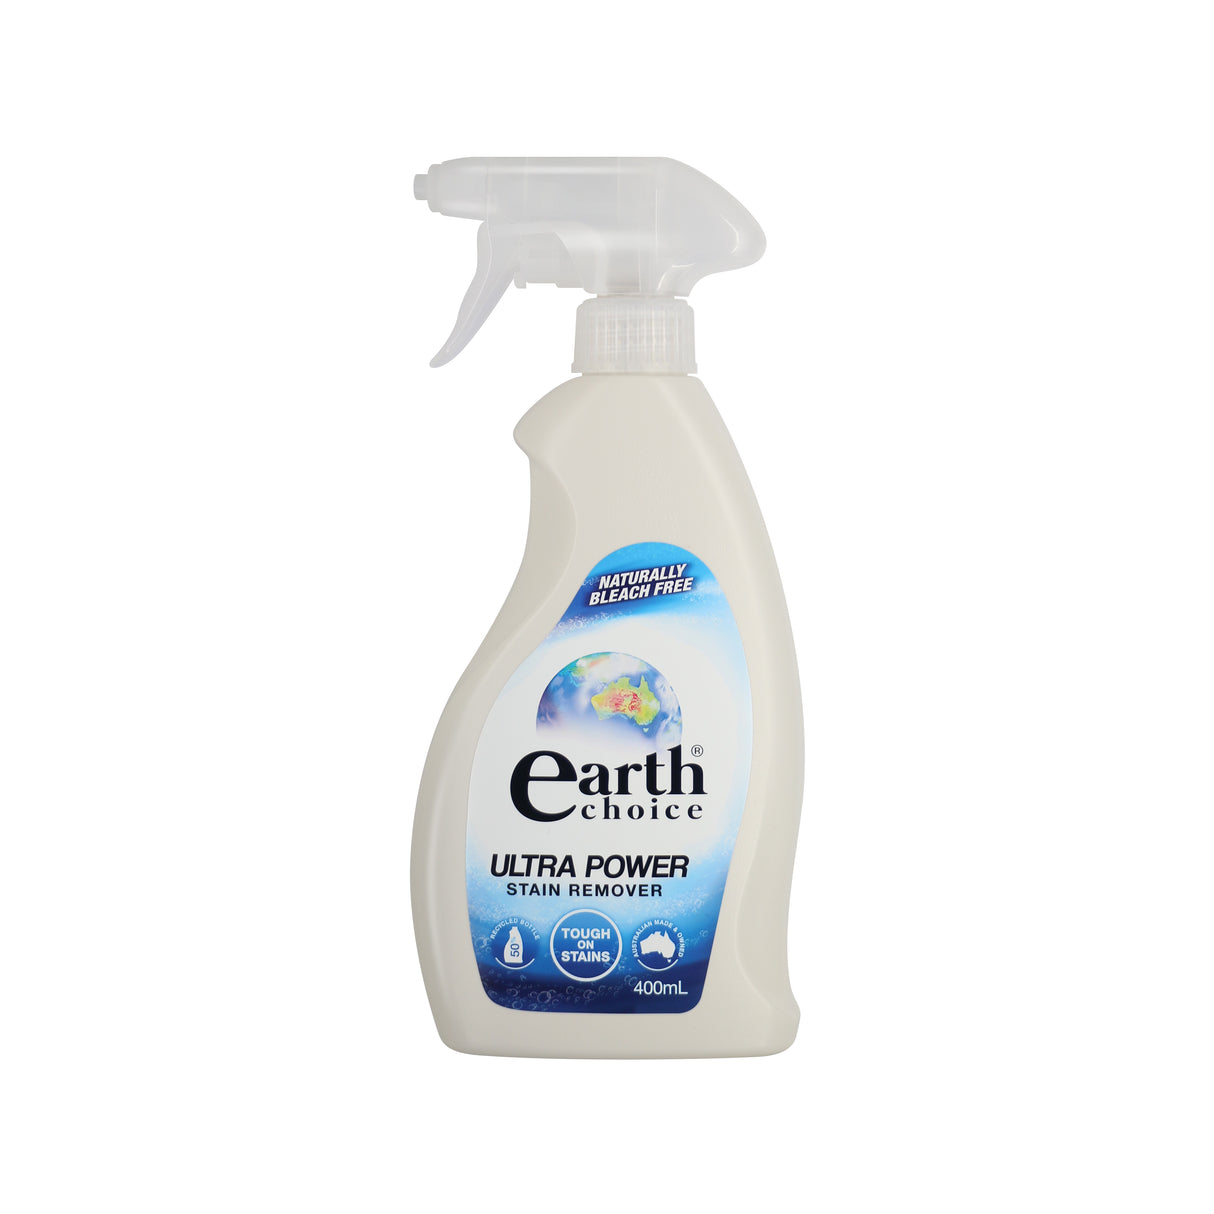 Earth Choice Ultra Power Stain Remover 400ml